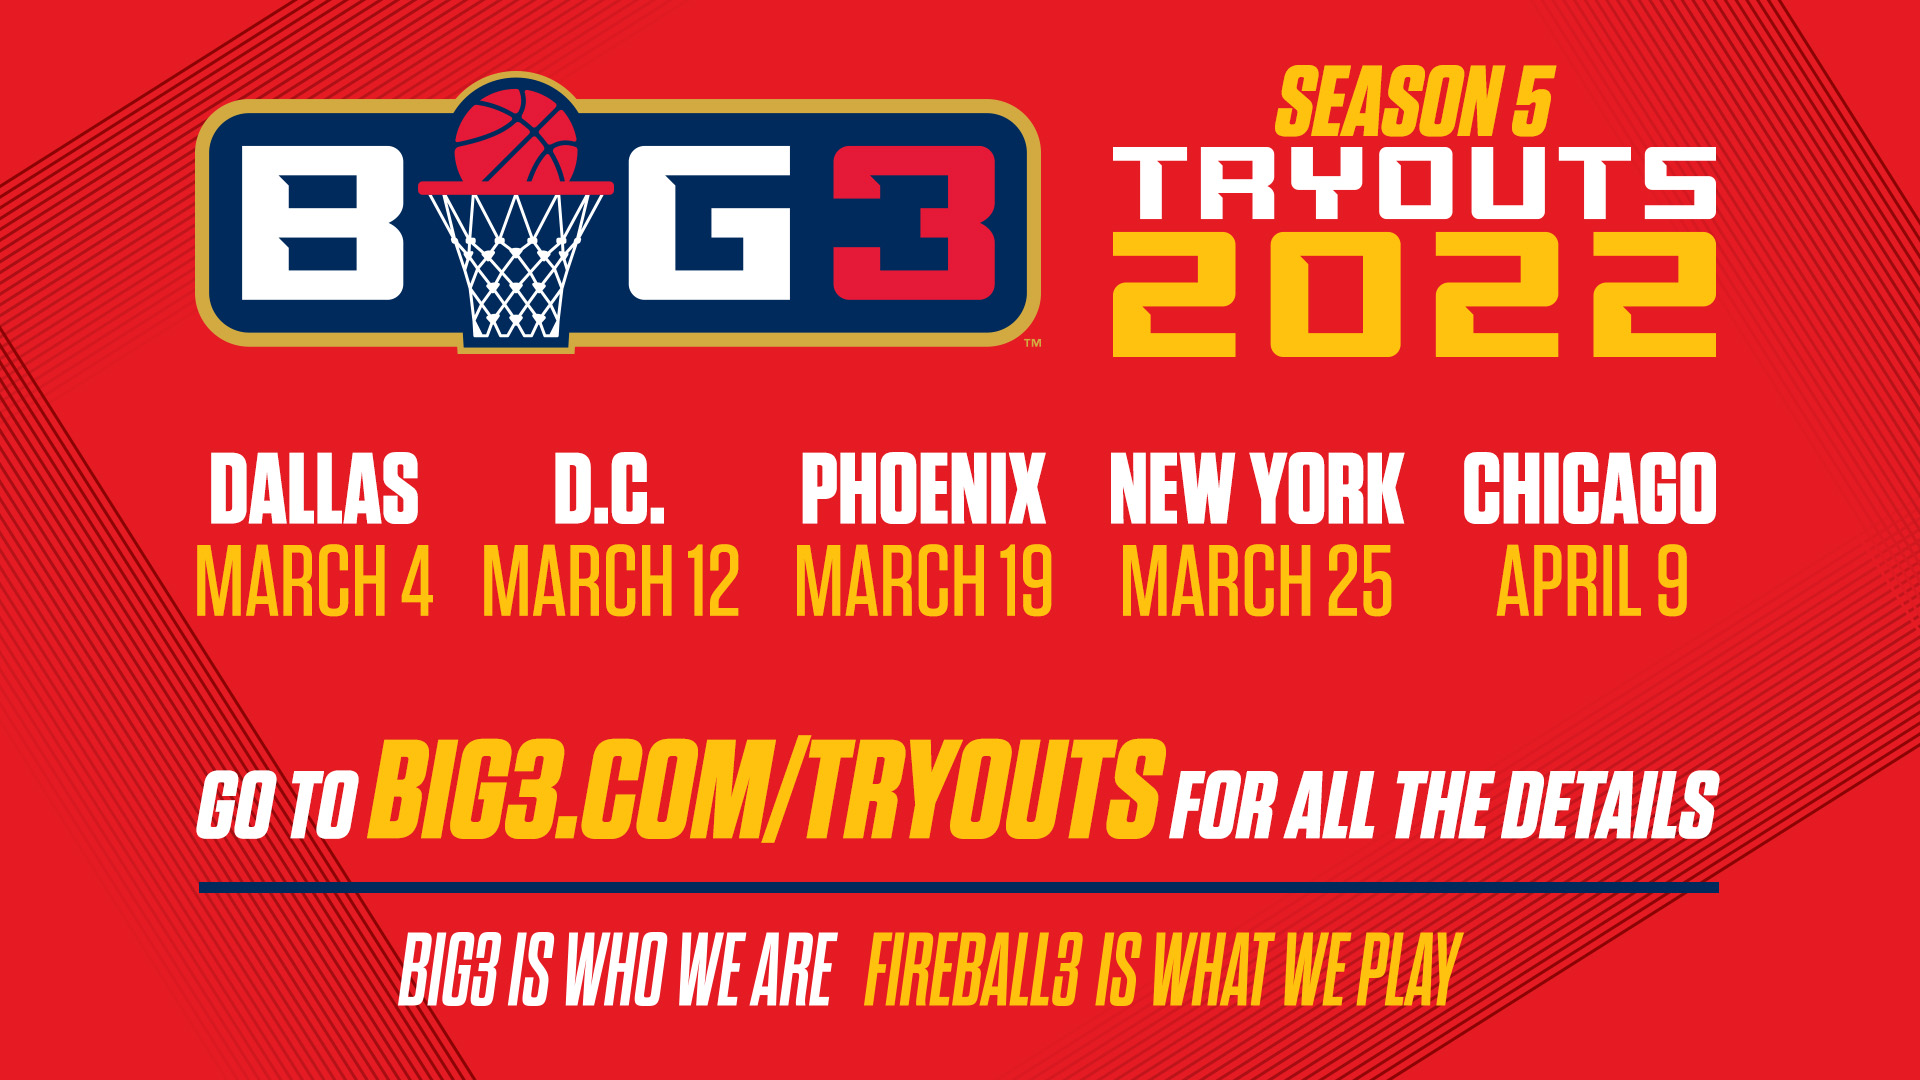 Lakeland Magic Announce Open Tryouts